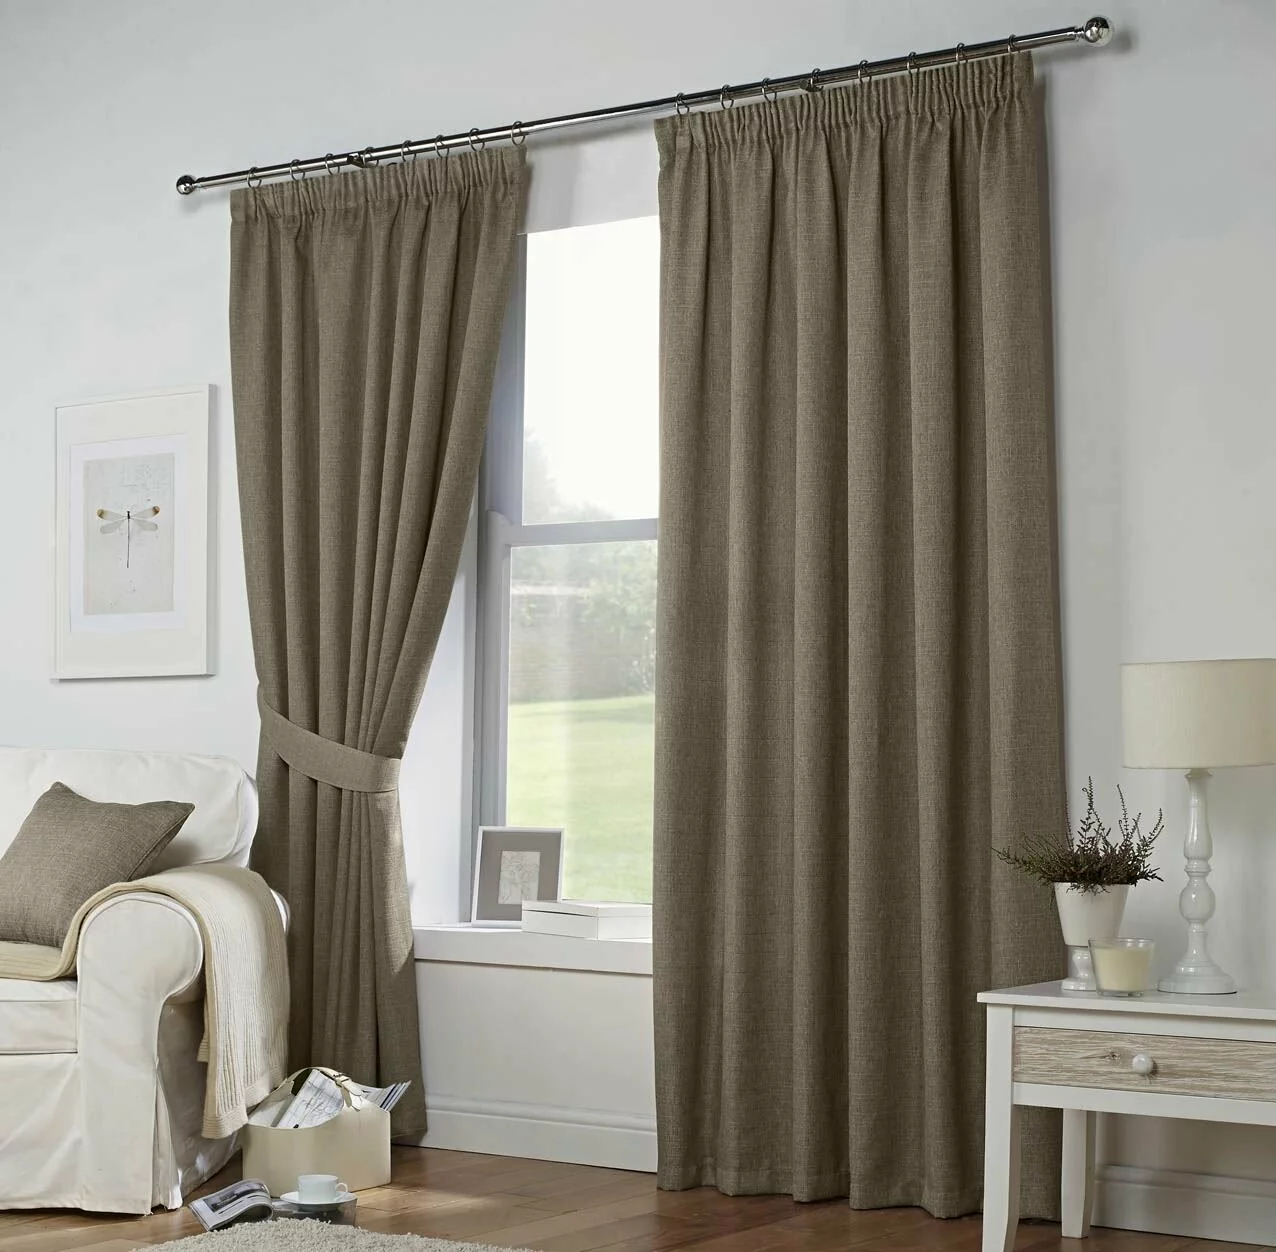 Tips for Using Cotton and Sheer Voile Curtains